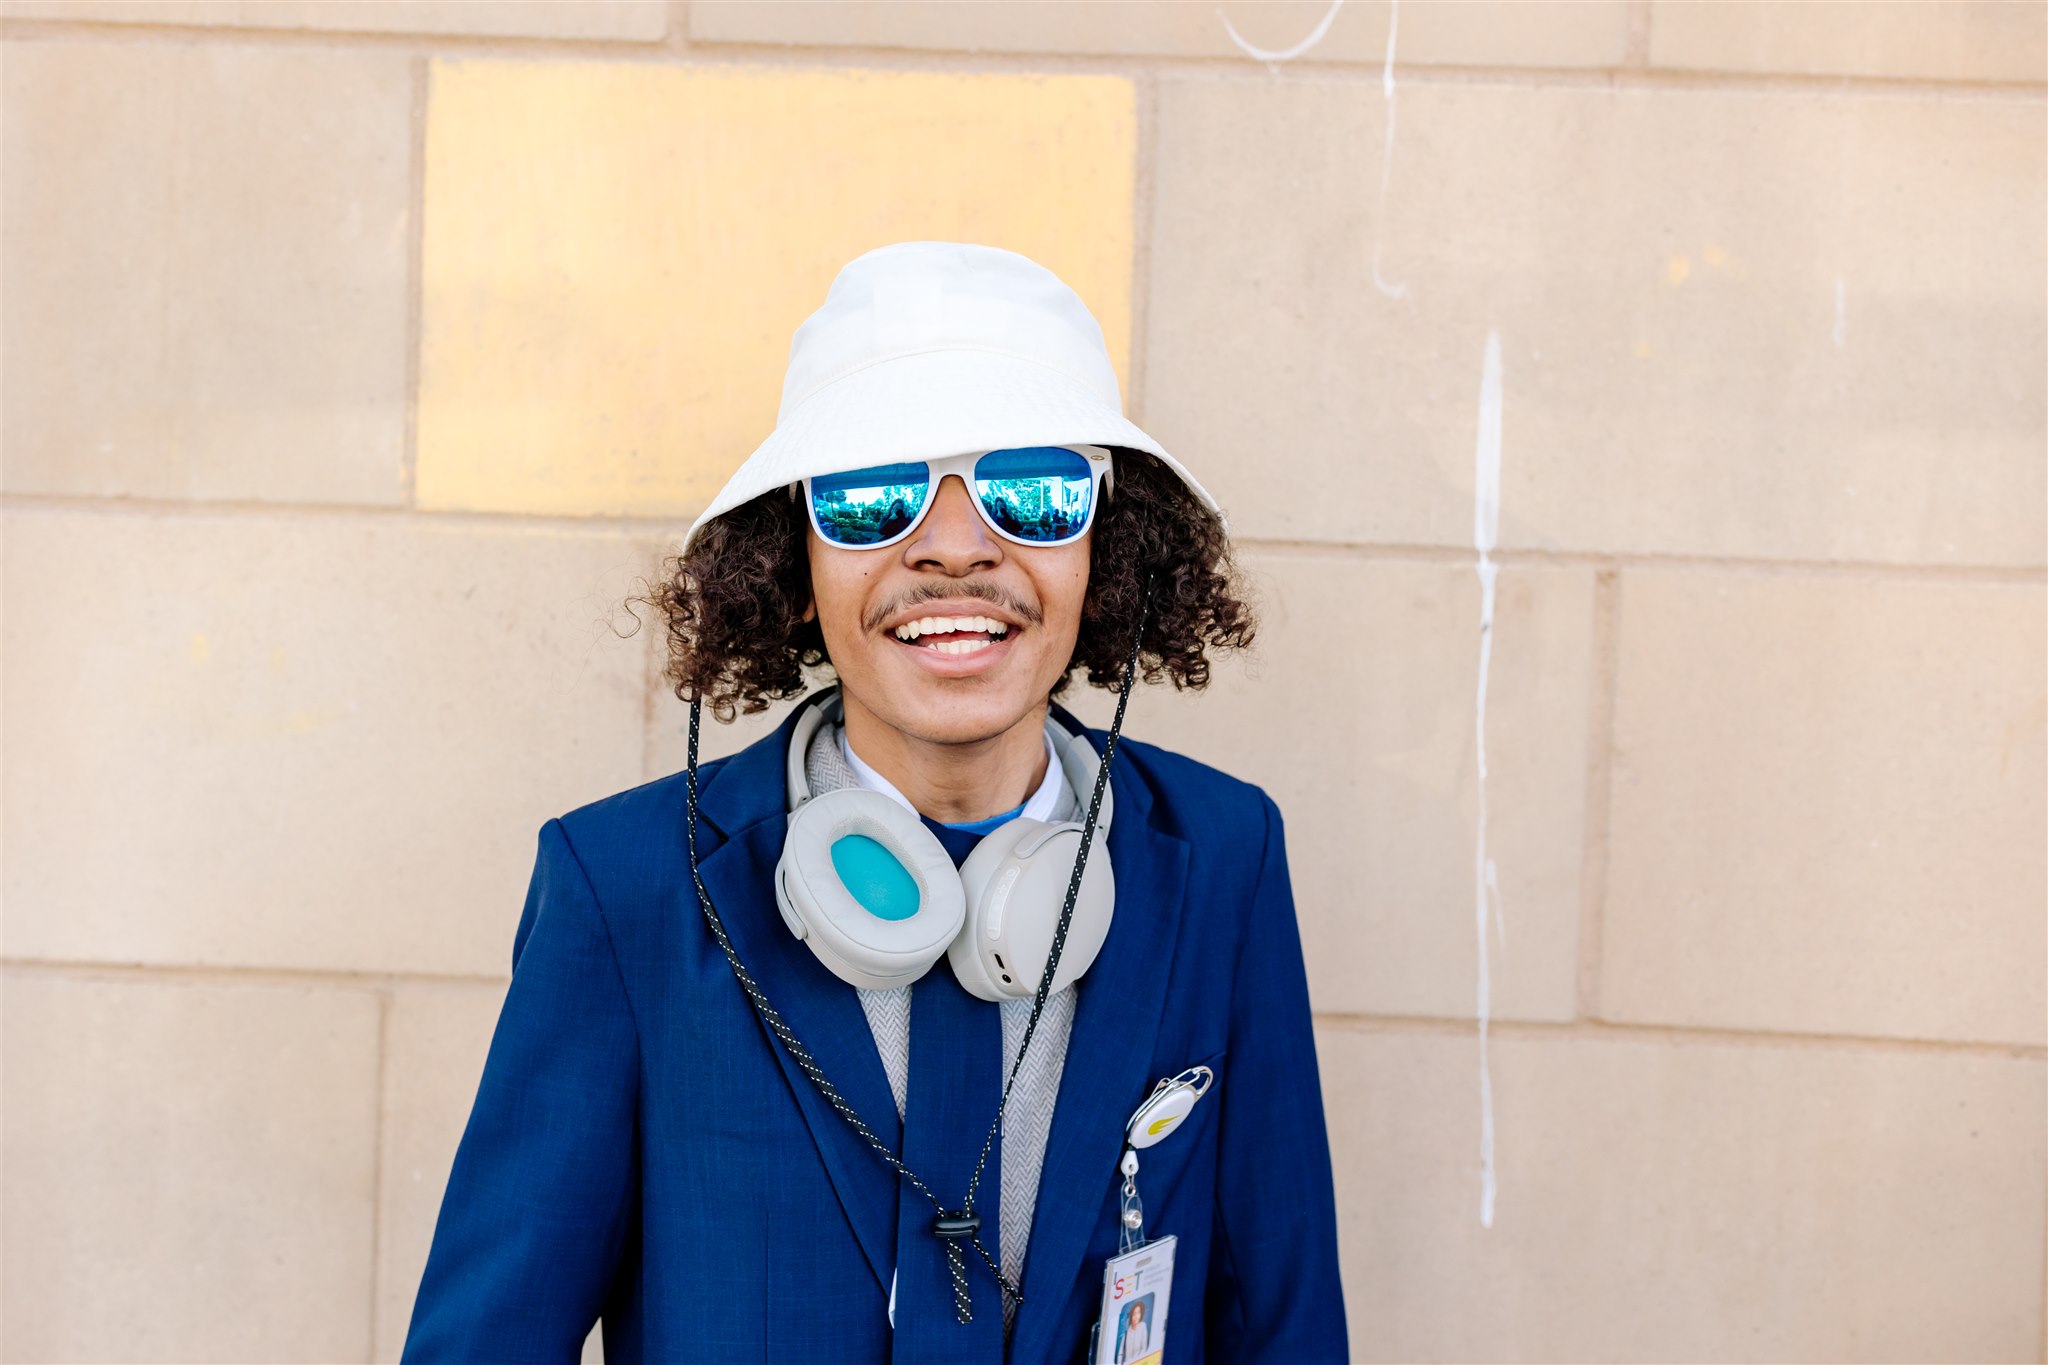 SET High student wearing a bright blue blazer, white bucket hat, mirror blue sunglasses and headphones around their neck smiles for the camera.